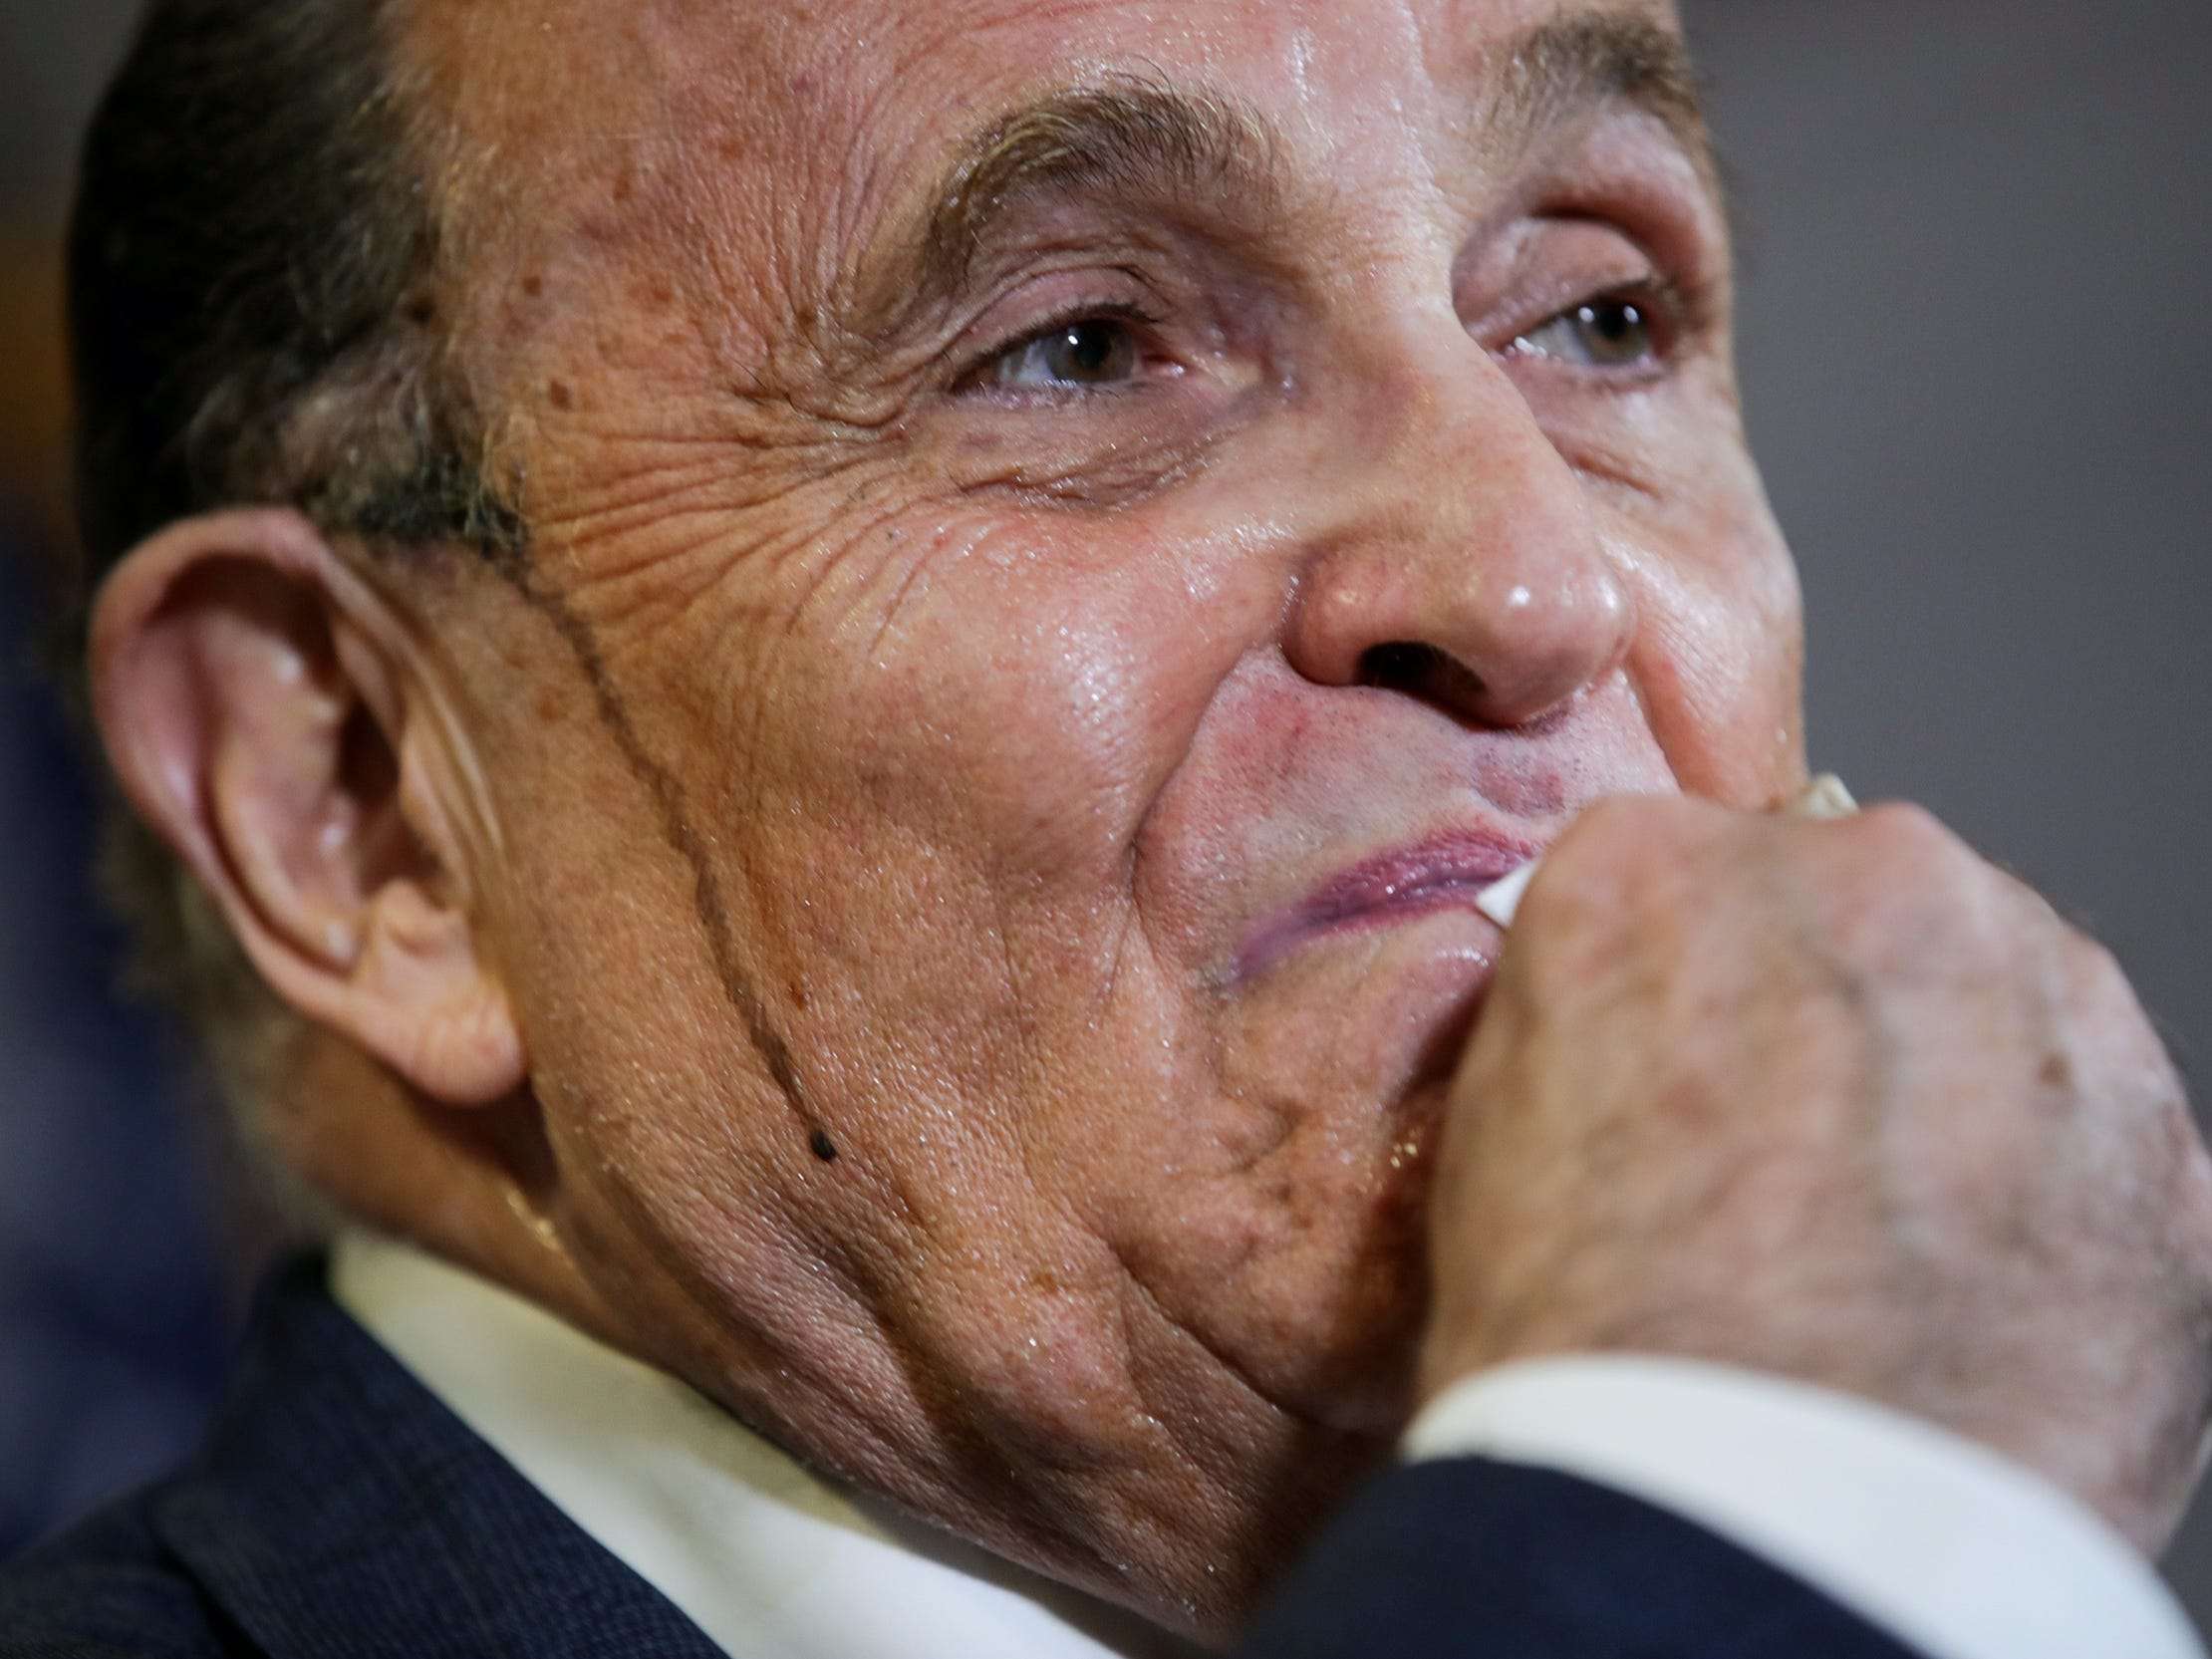 Rudy Giuliani straight up asked a federal judge to ignore ...